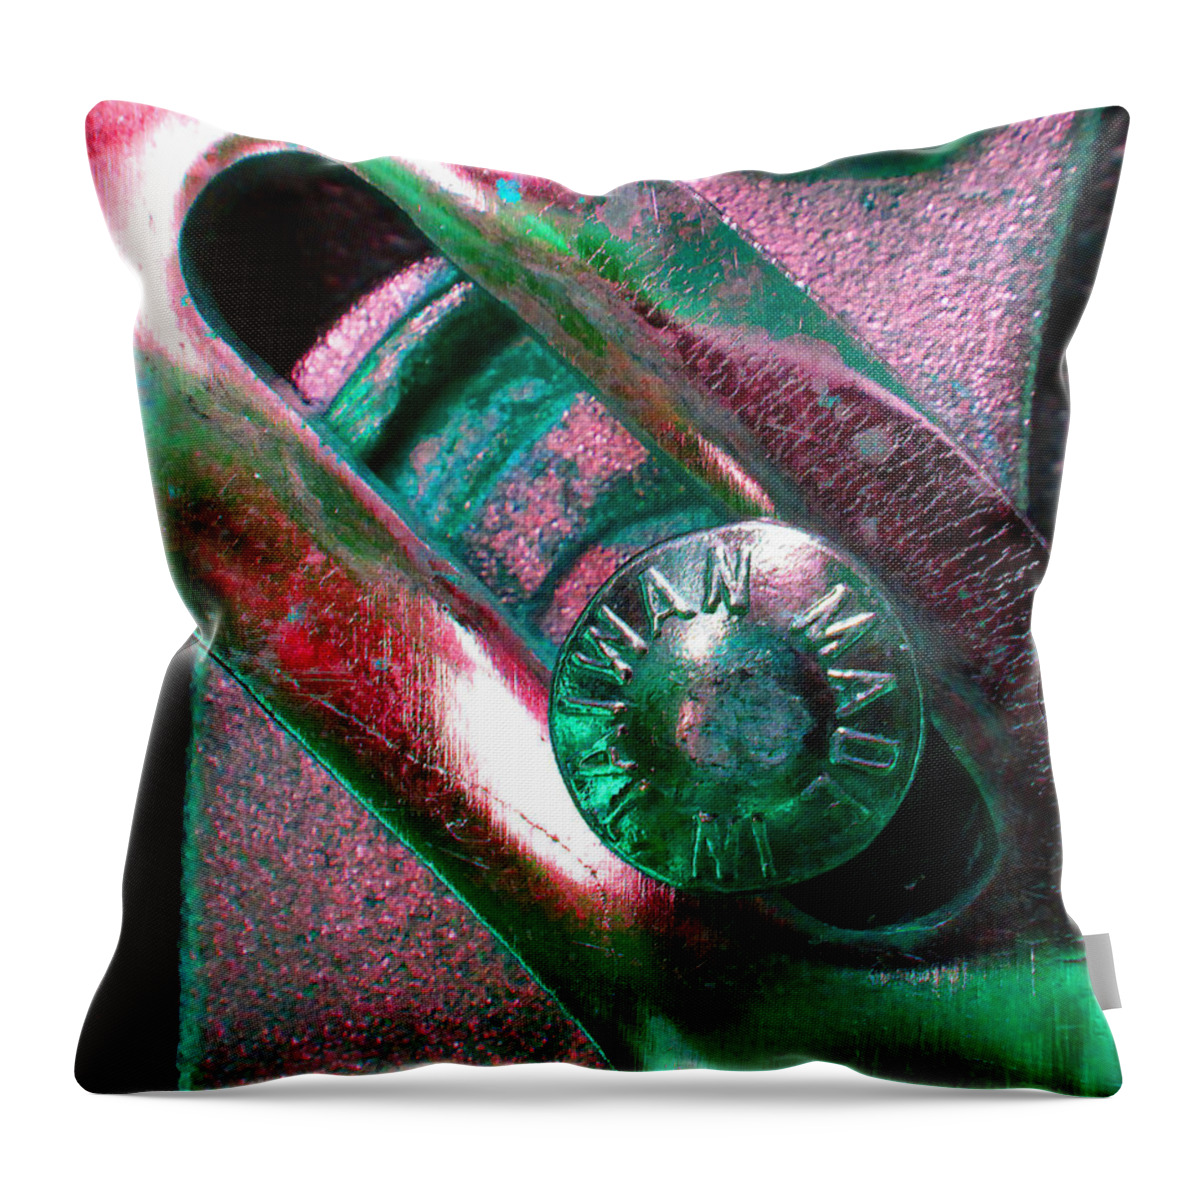 Hammer Throw Pillow featuring the photograph Adjustable Wrench Q by Laurie Tsemak